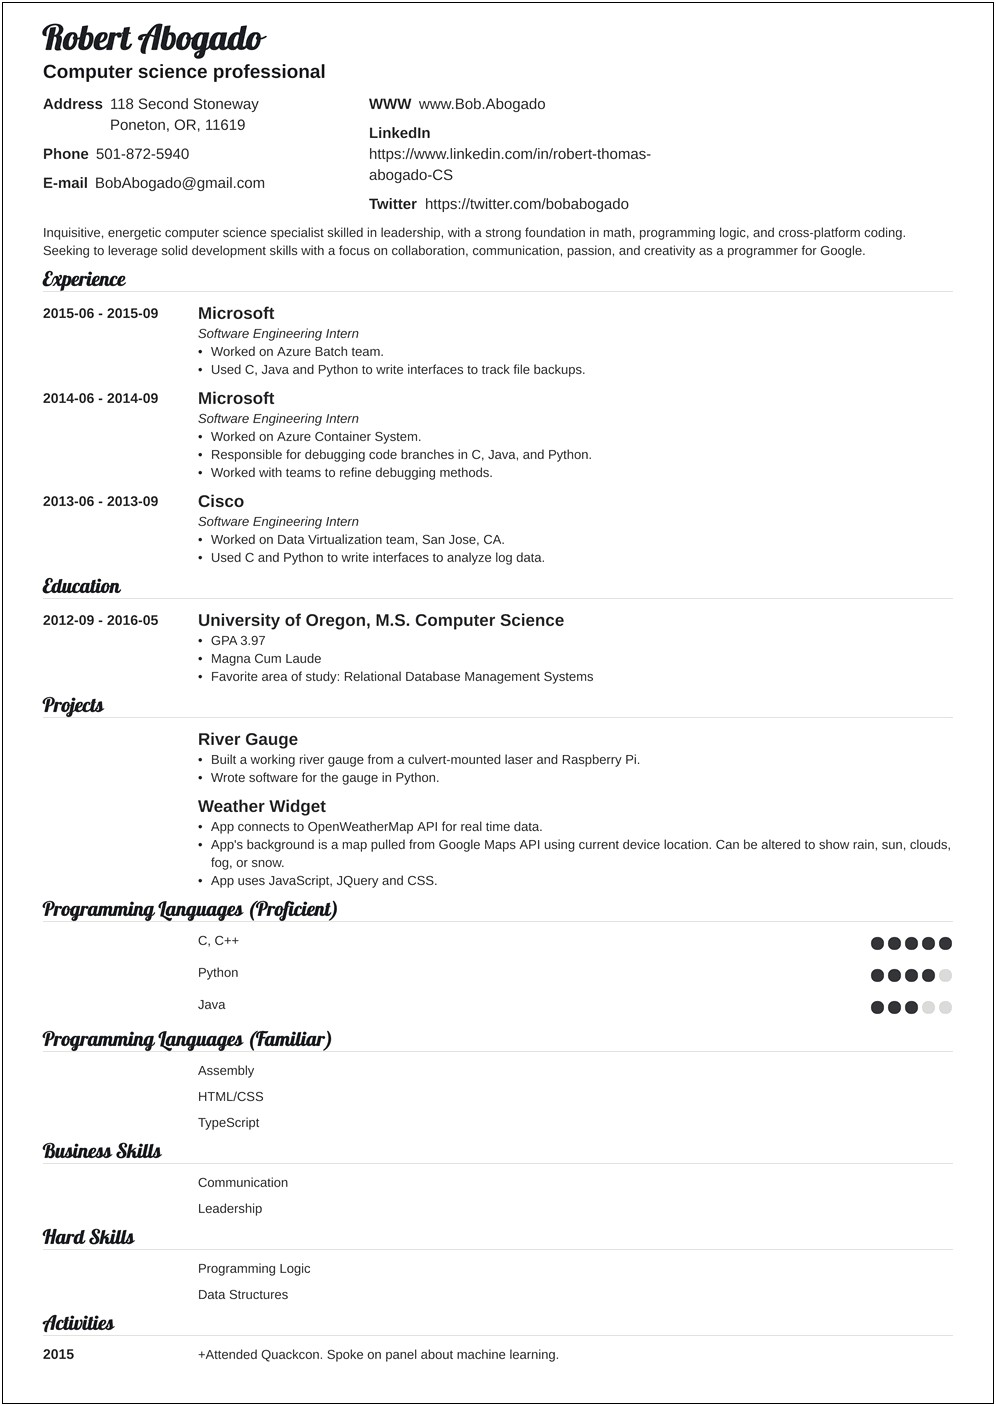 About Me Resume Template For Computer Science